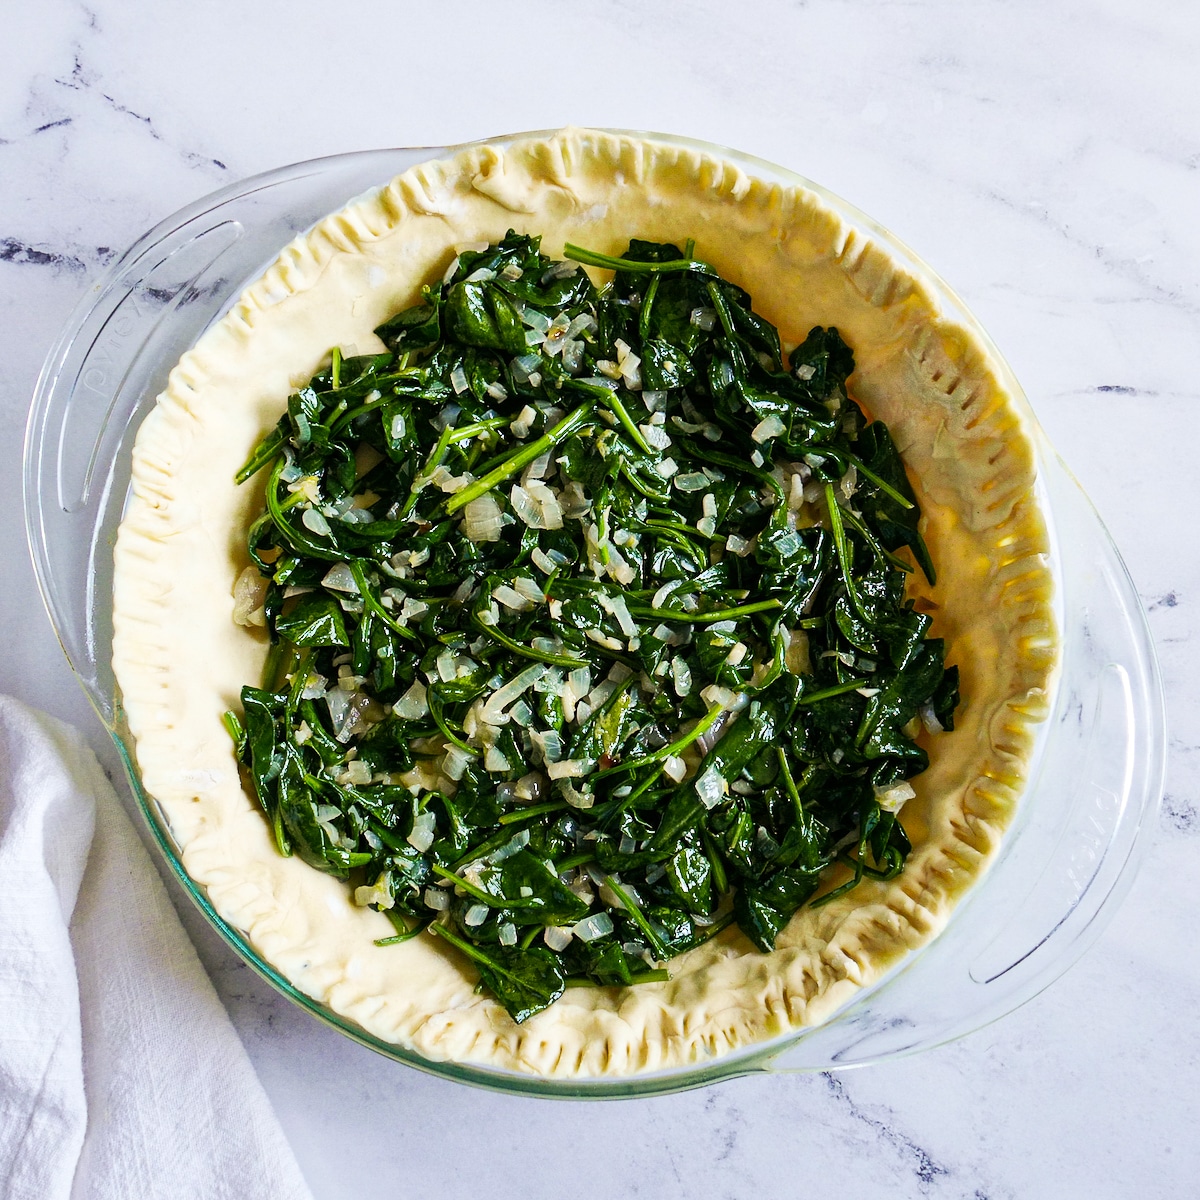 Cooked spinach mixture in prepared pastry shell.